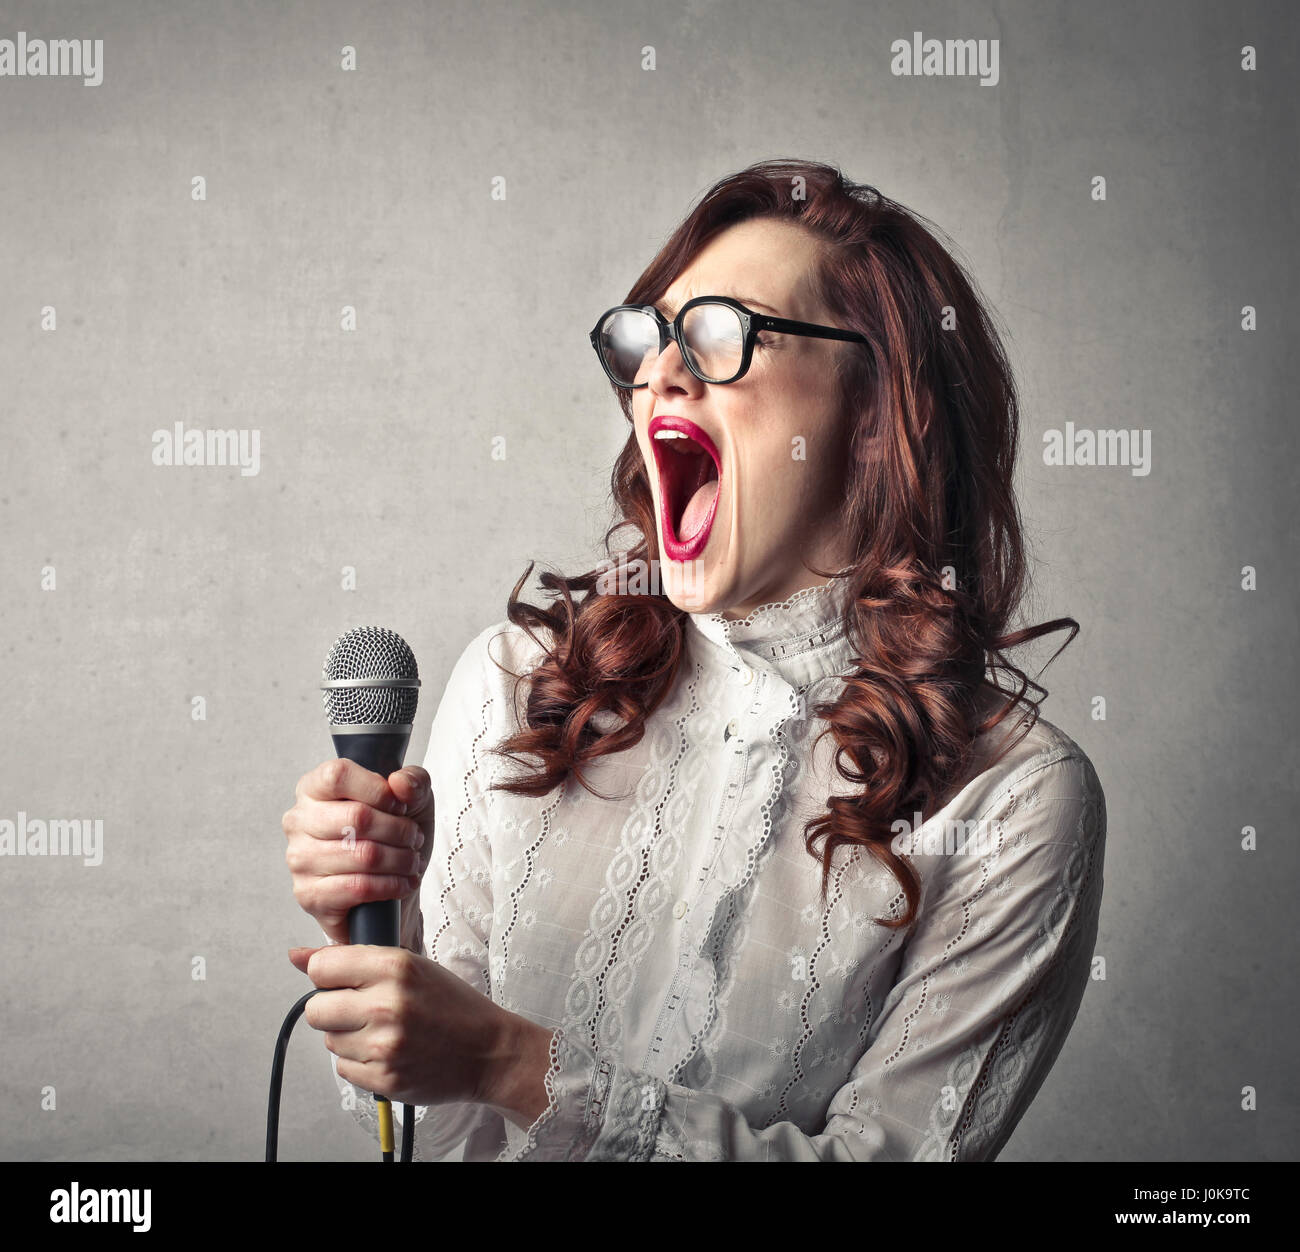 Woman singing with microphone Stock Photo